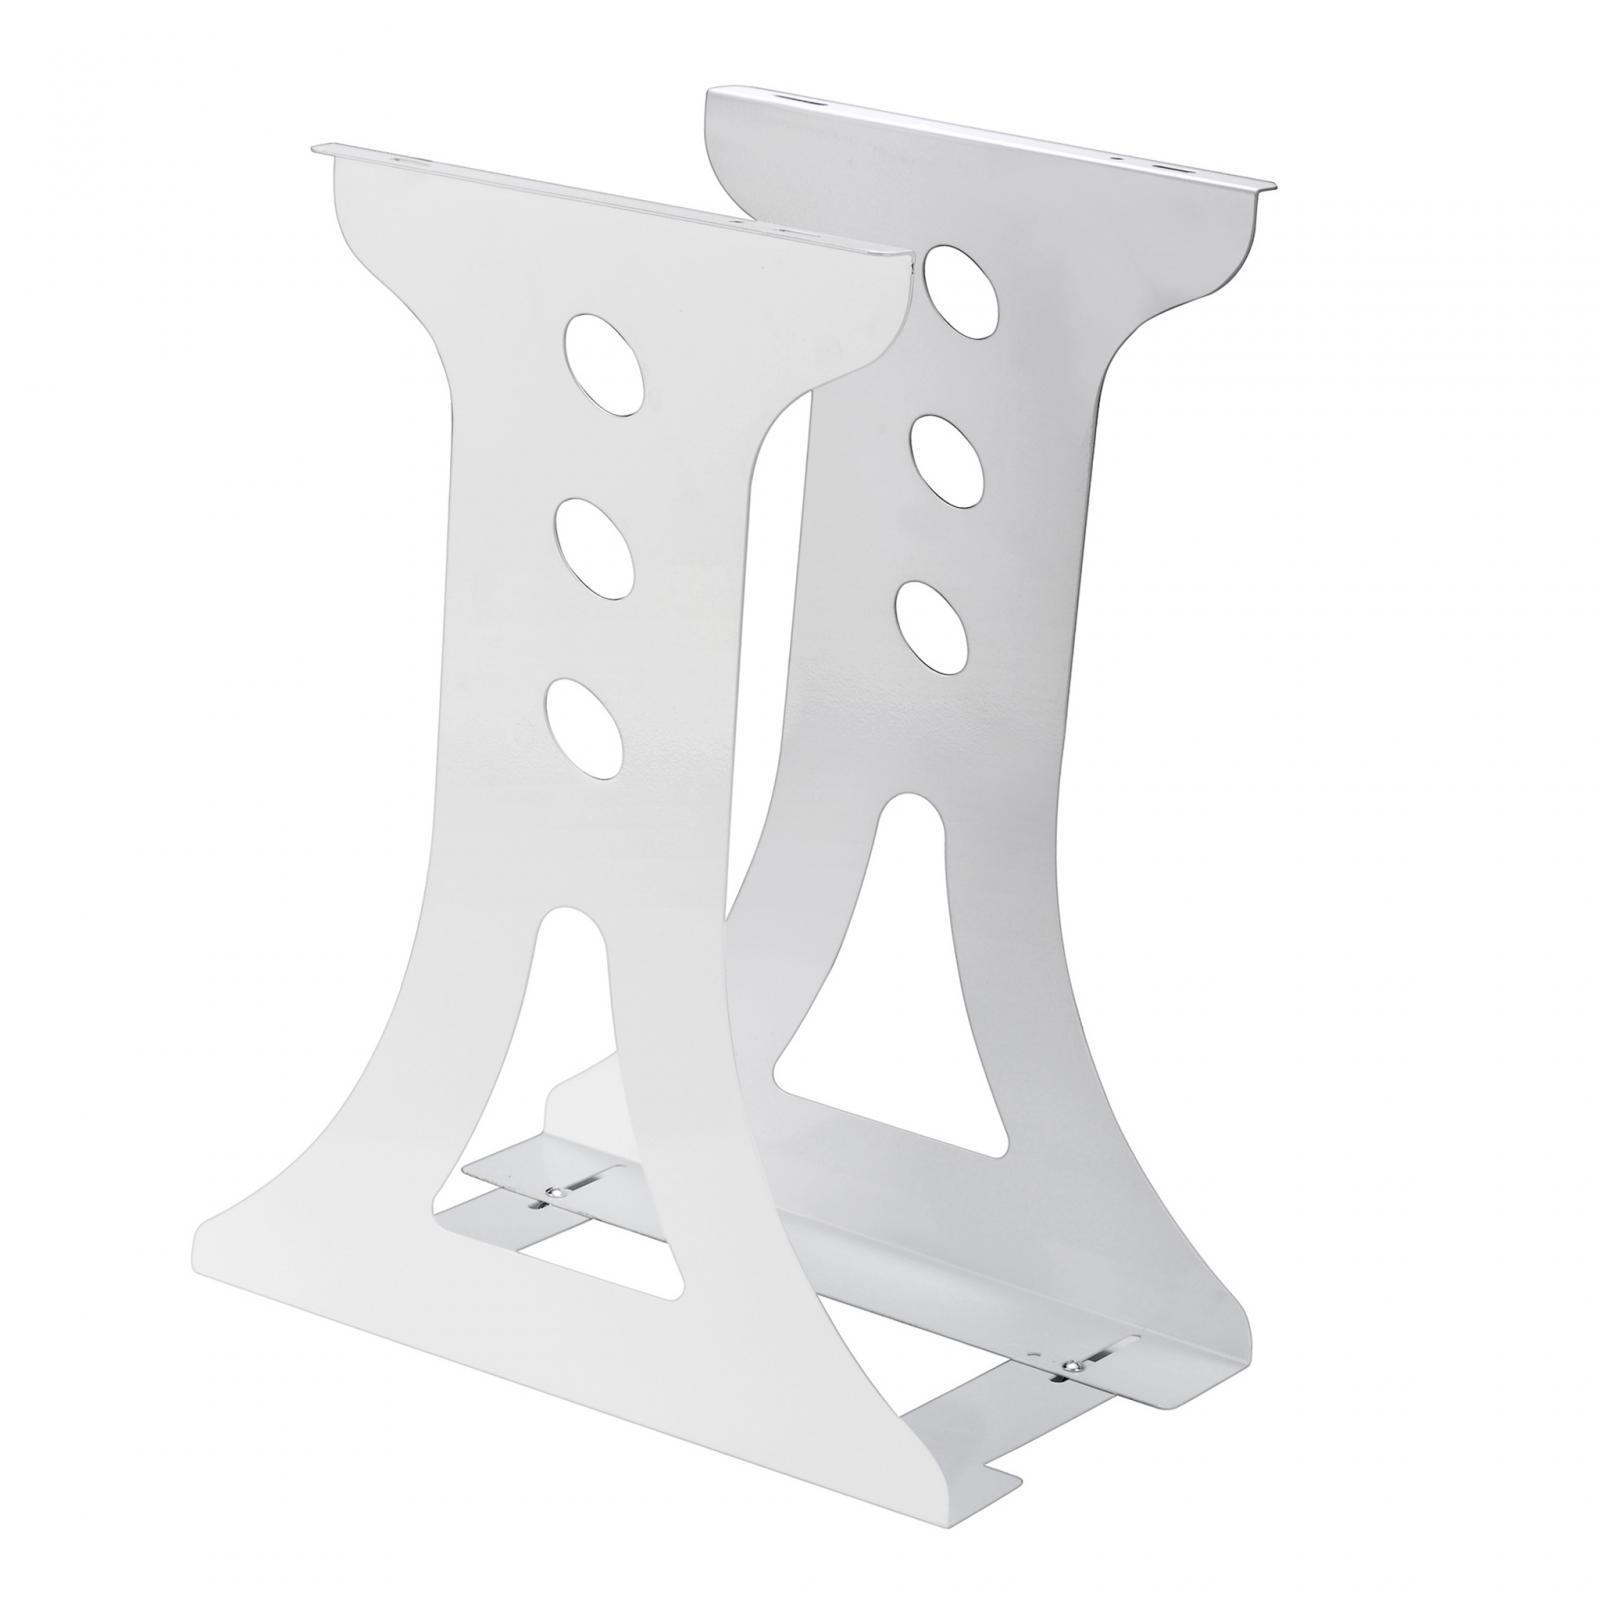 Adjustable under Desk PC Mount Easy to Install Accessory PC under Desk Mount - white